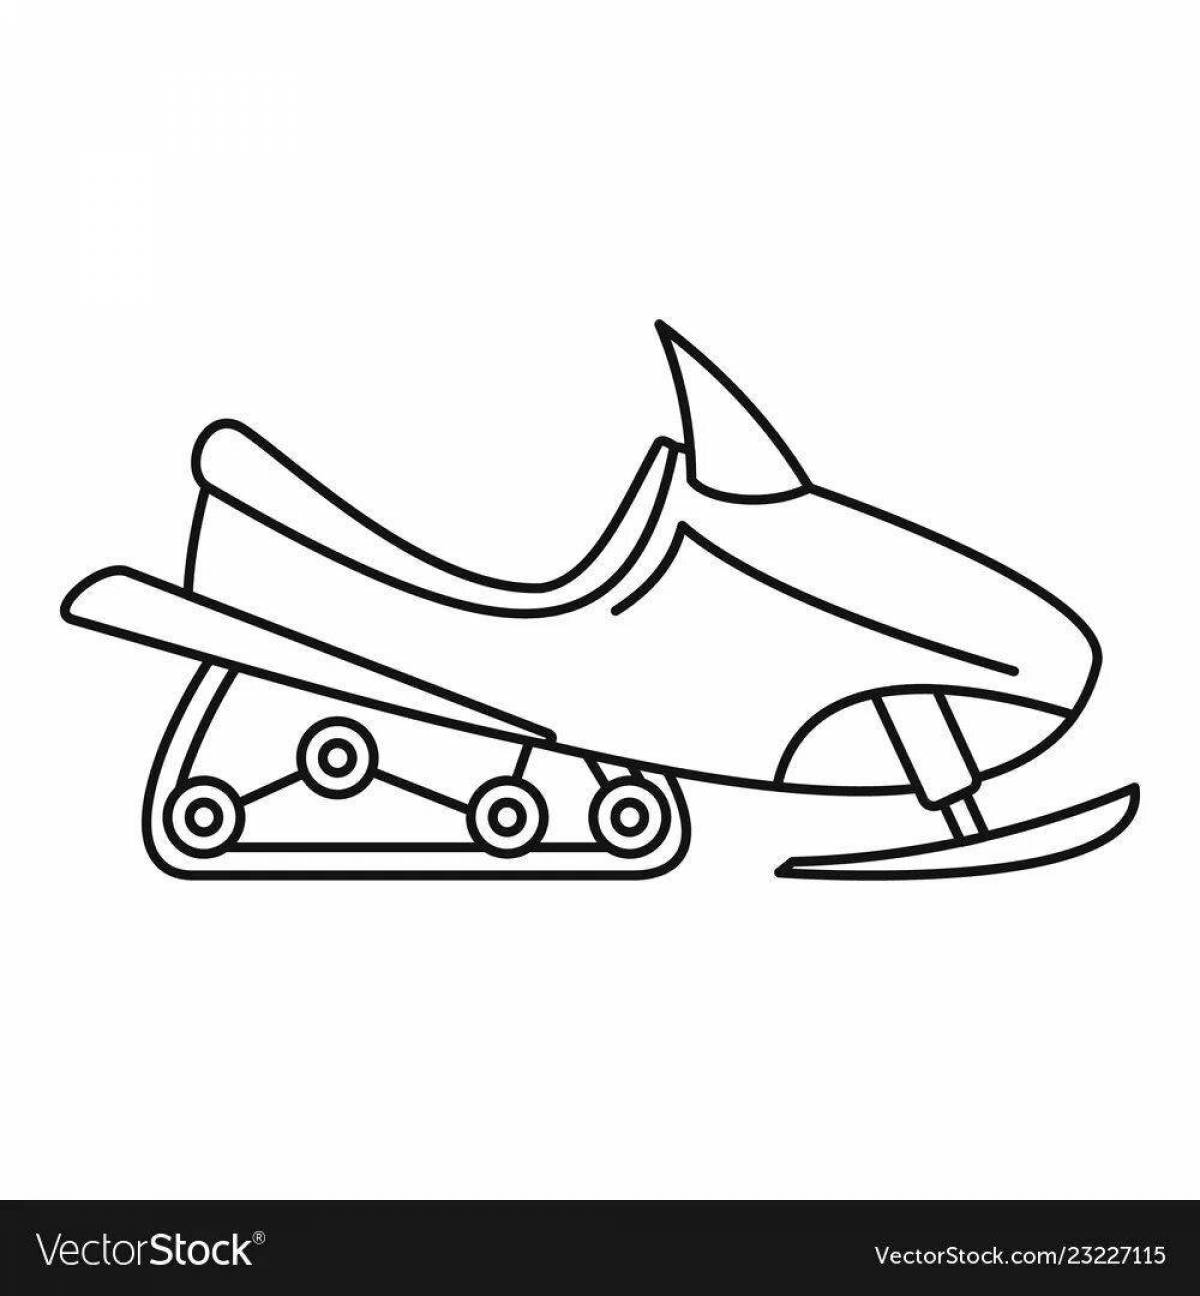 Fabulous coloring pages of snowmobiles for kids